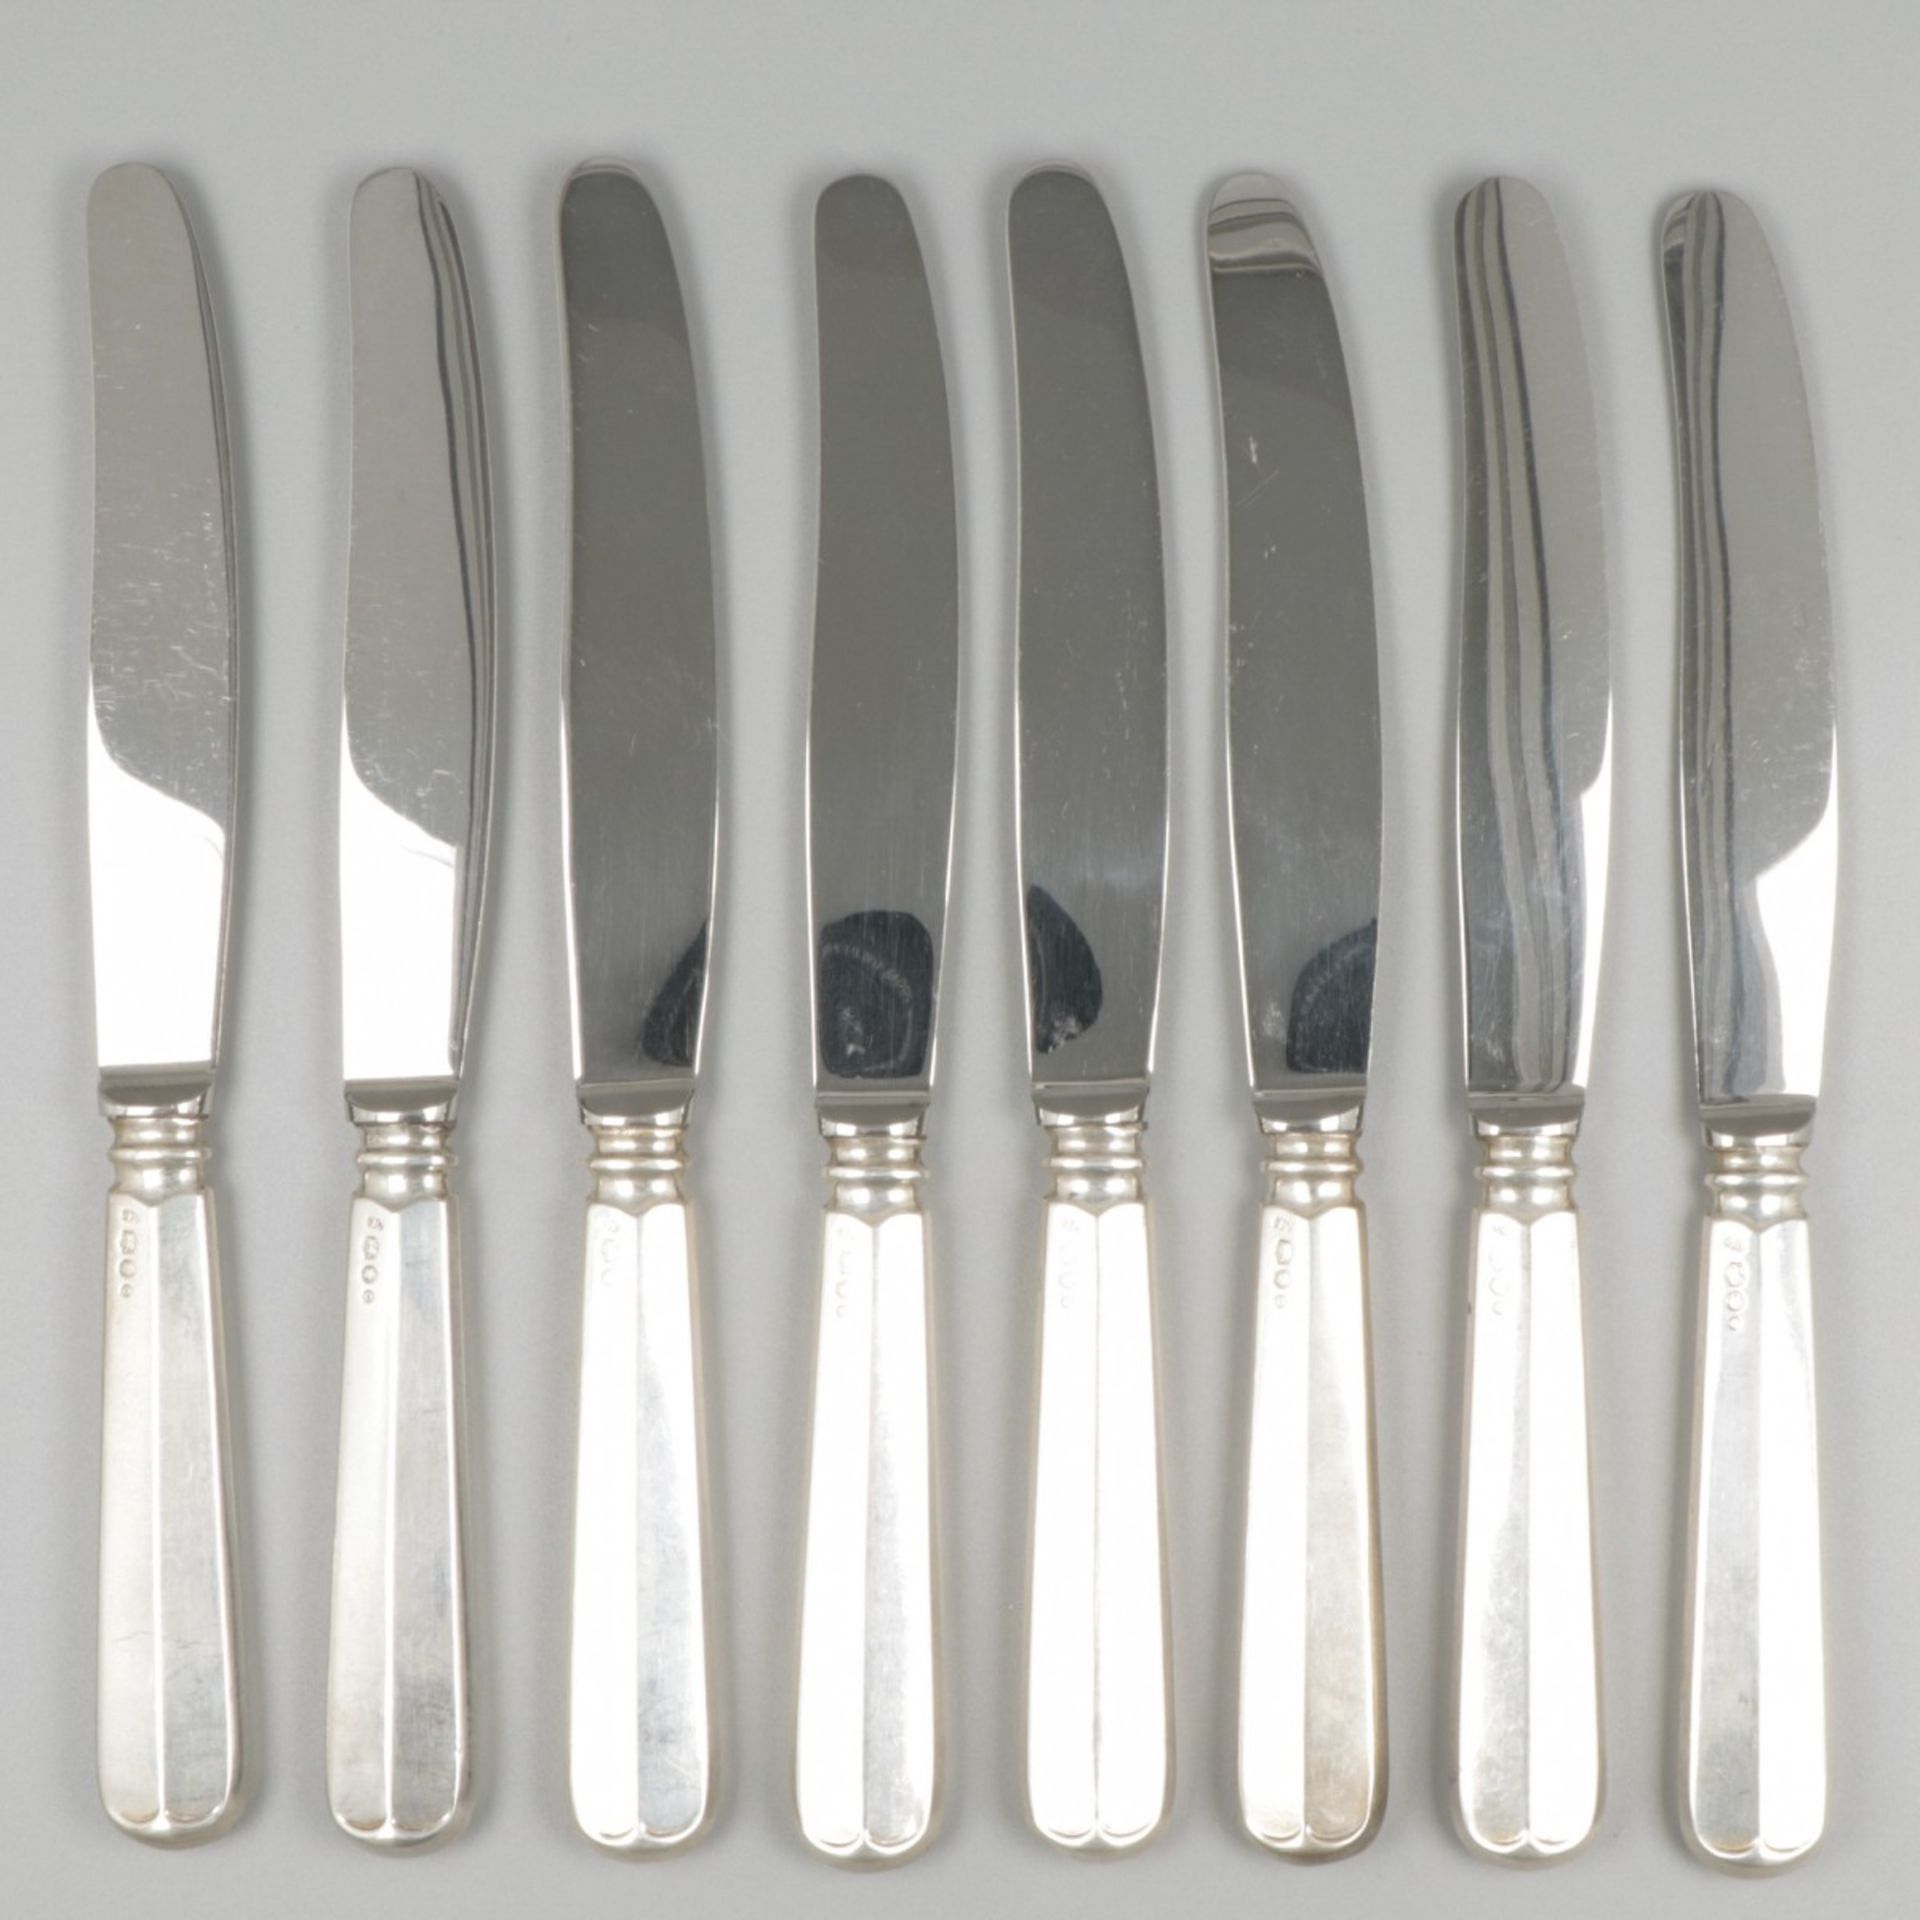 8-piece set of knives "Haags Lofje" silver.